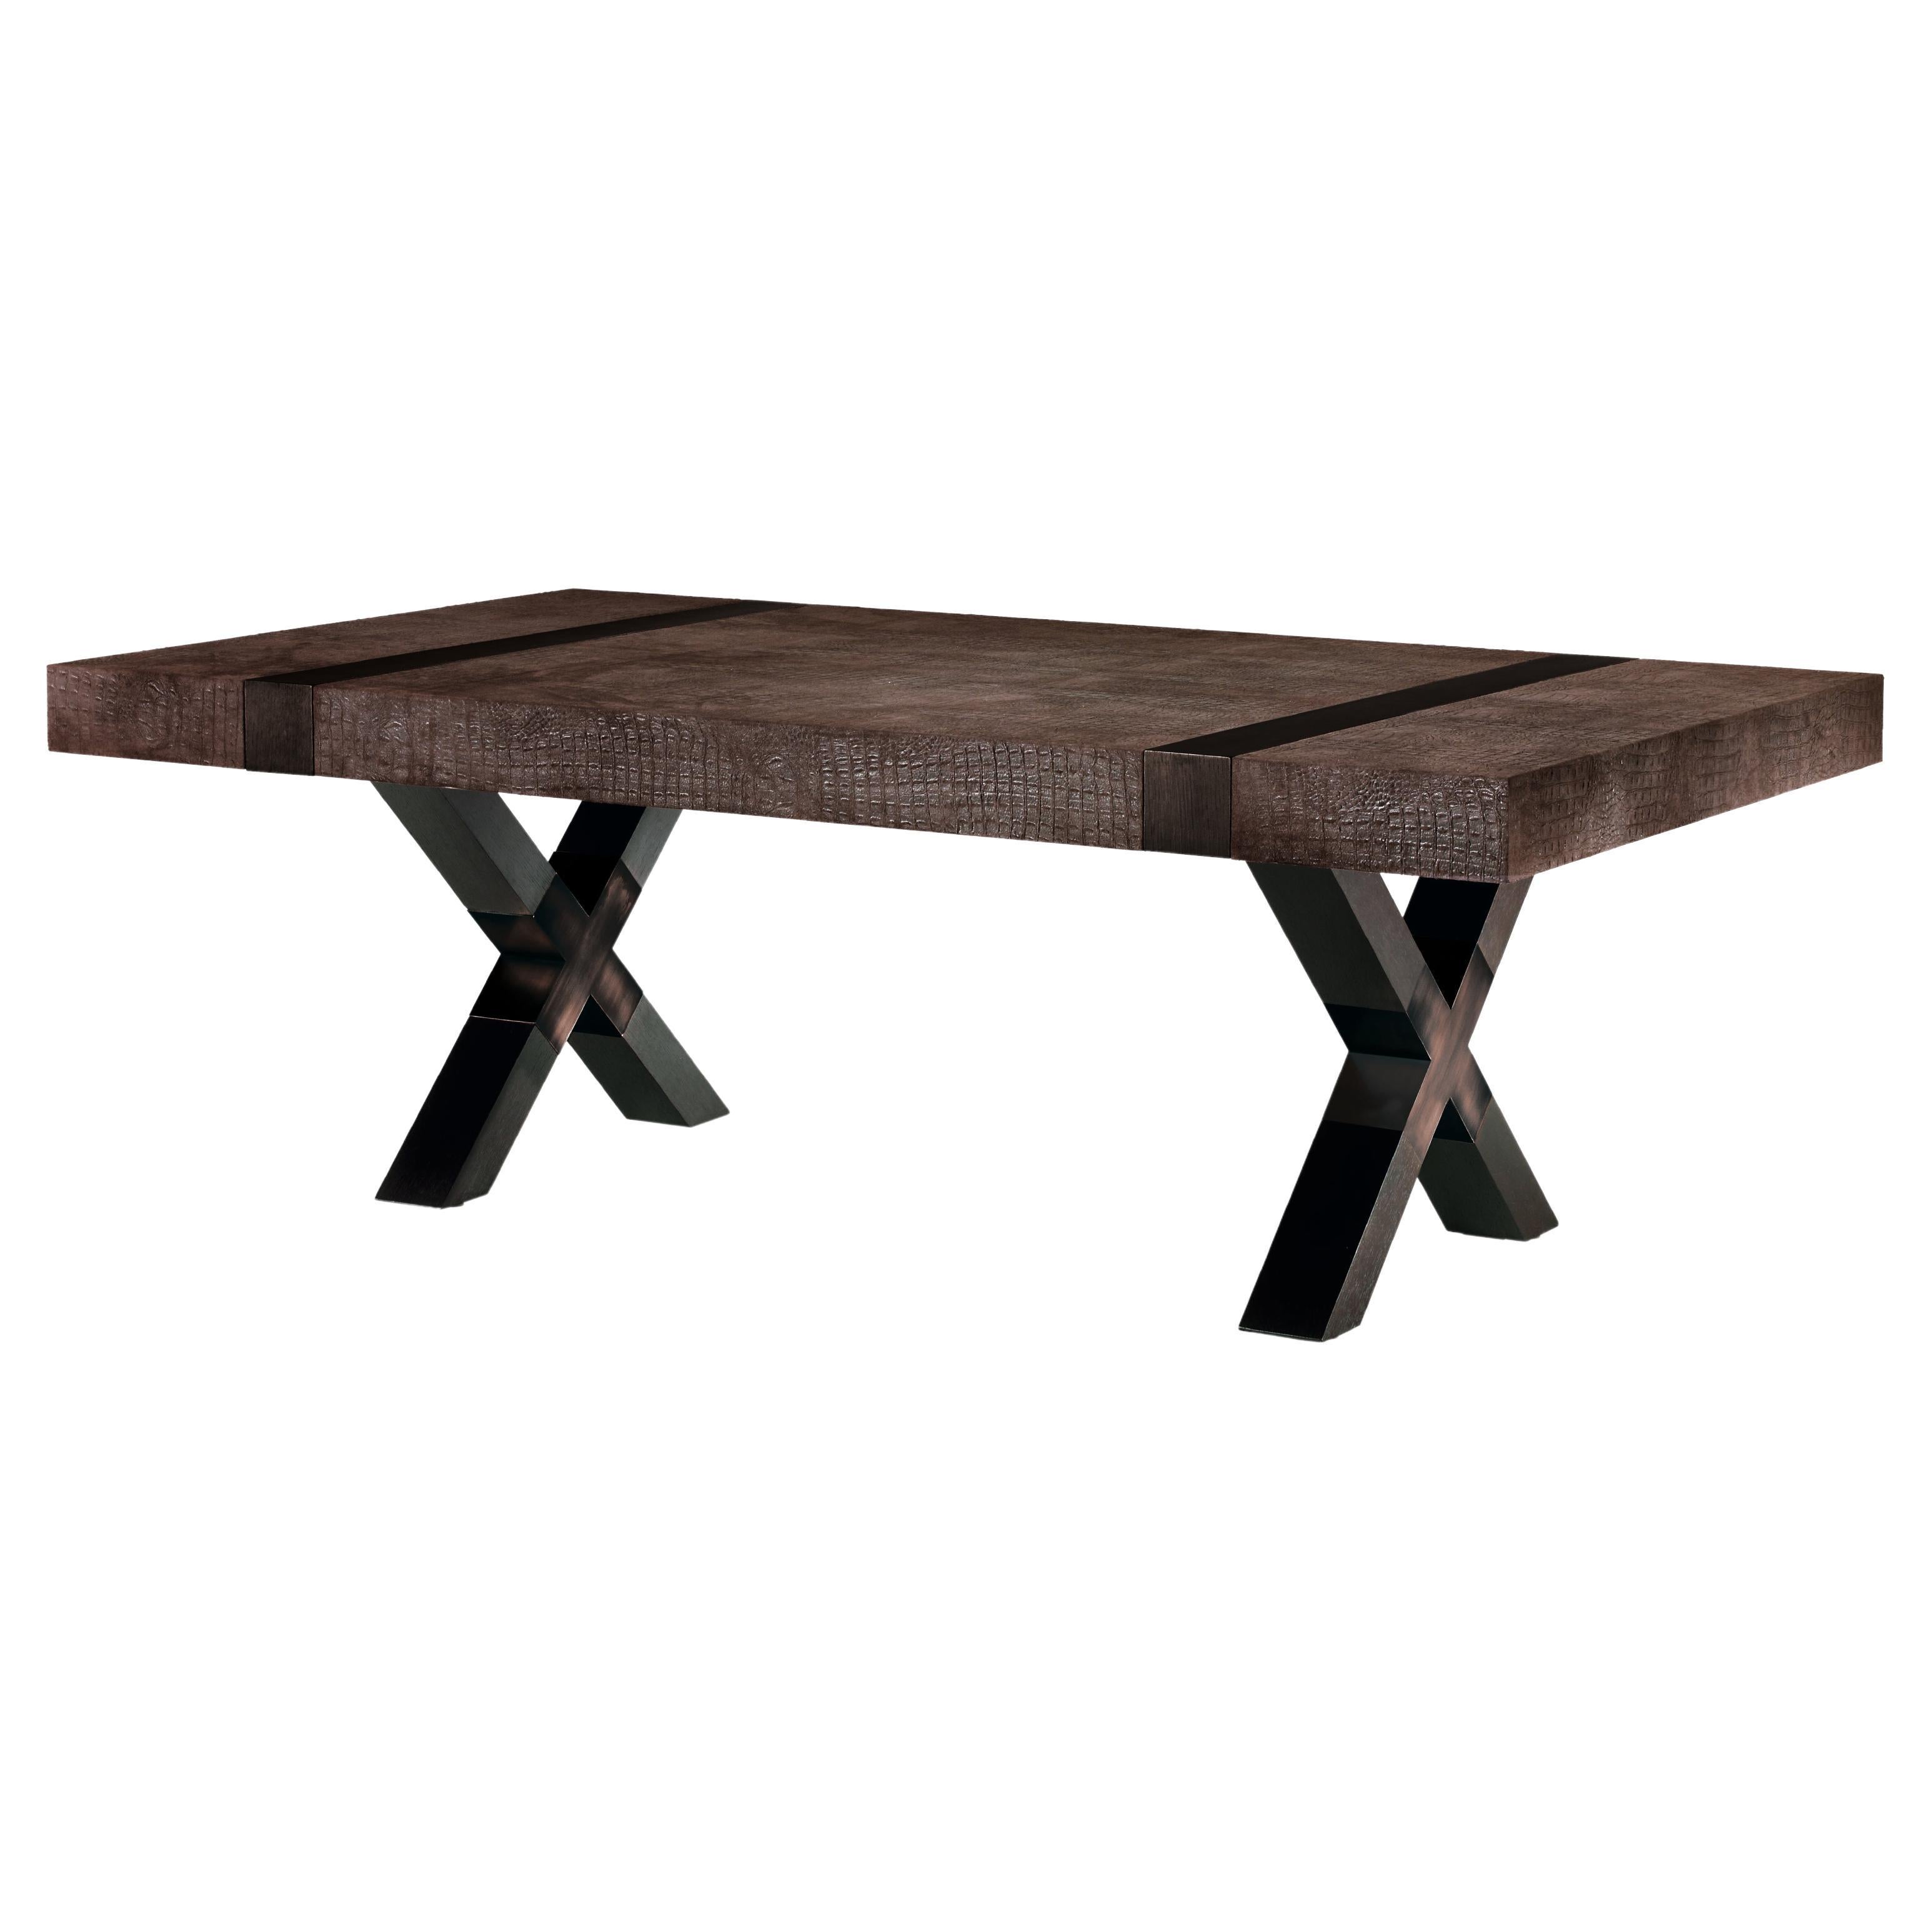 Jaya, Orsi, Mrs. Elise Som, Croco Dining Table, Wengè, Leather, Copper Bronze For Sale